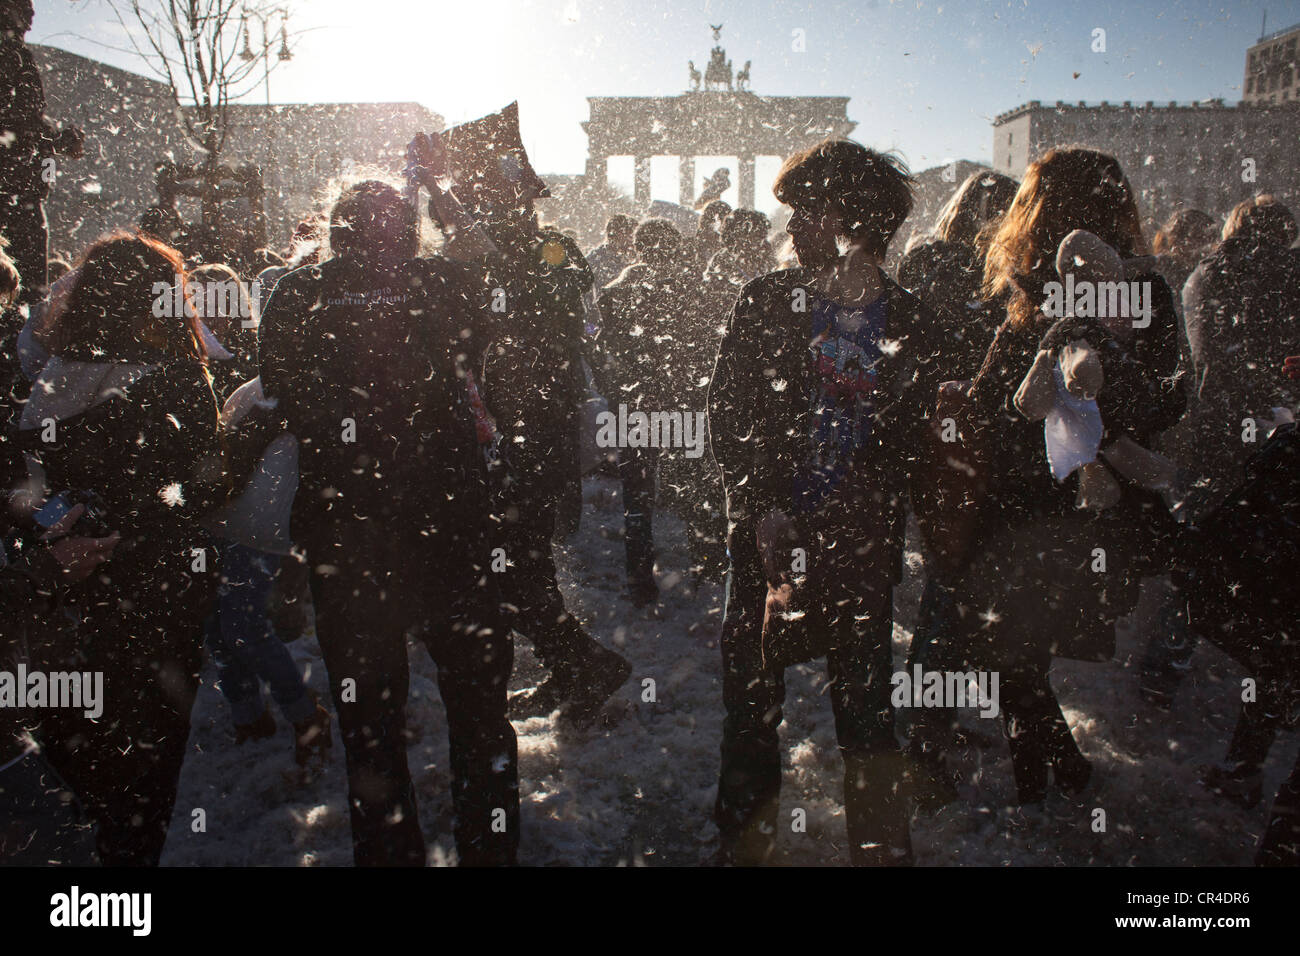 Several hundred people at a flash mob pillow fight arranged through Facebook, at the Brandenburg Gate, Berlin, Germany, Europe Stock Photo